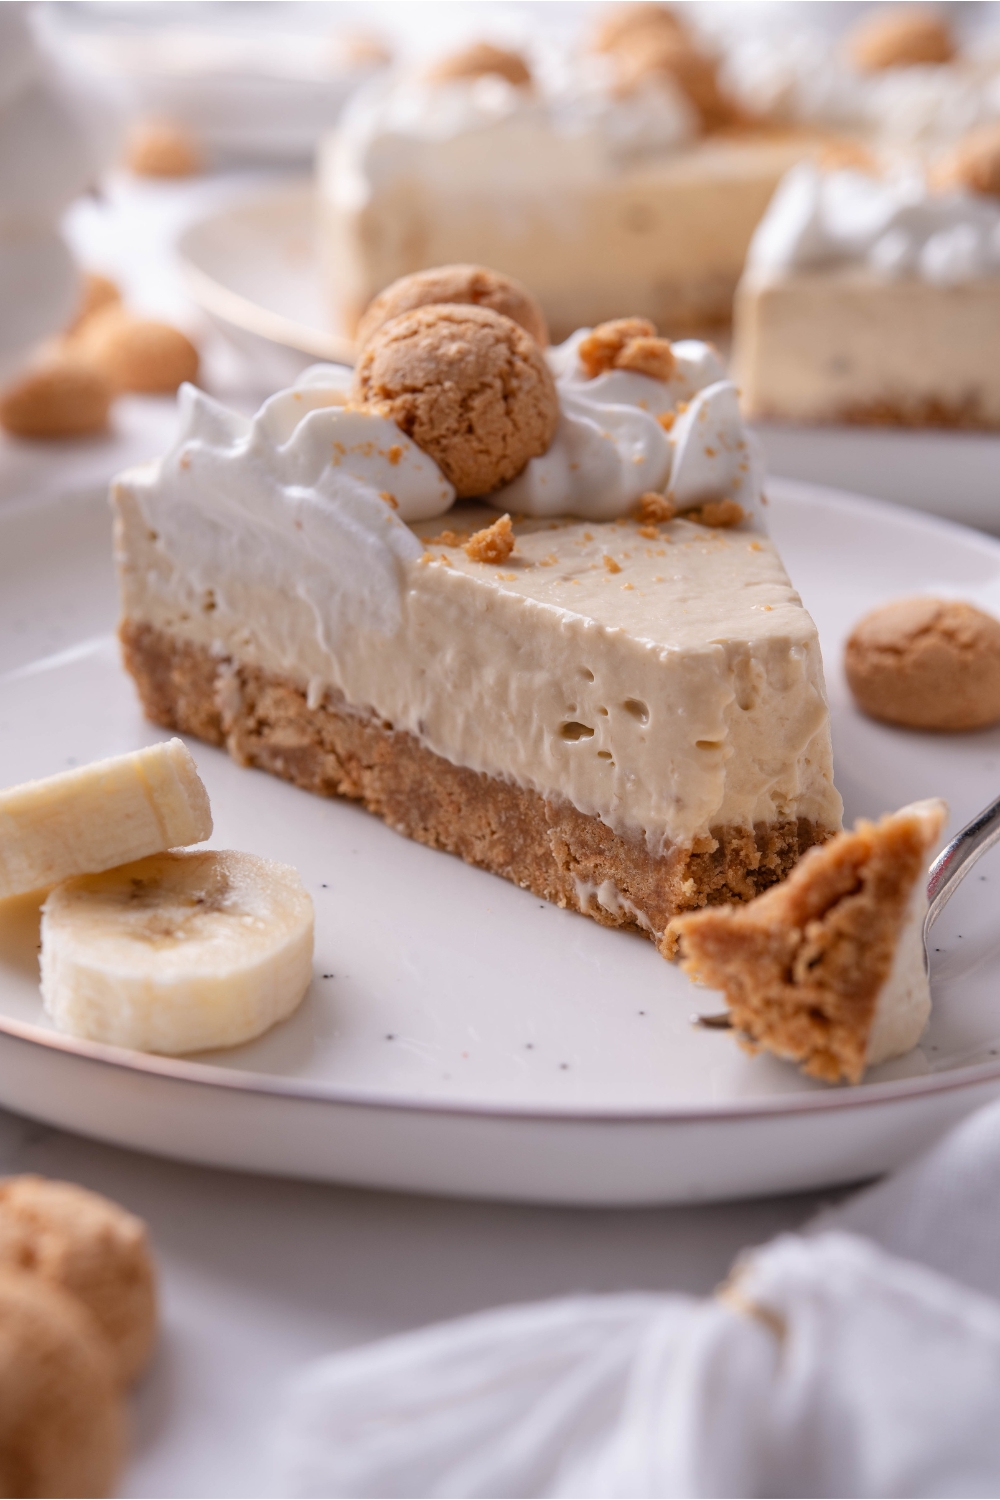 A serving of banana cheesecake on a plate with a bite taken out using a fork that is on the plate. The cheesecake has a cookie crust and is topped with whipped cream and mini cookies.